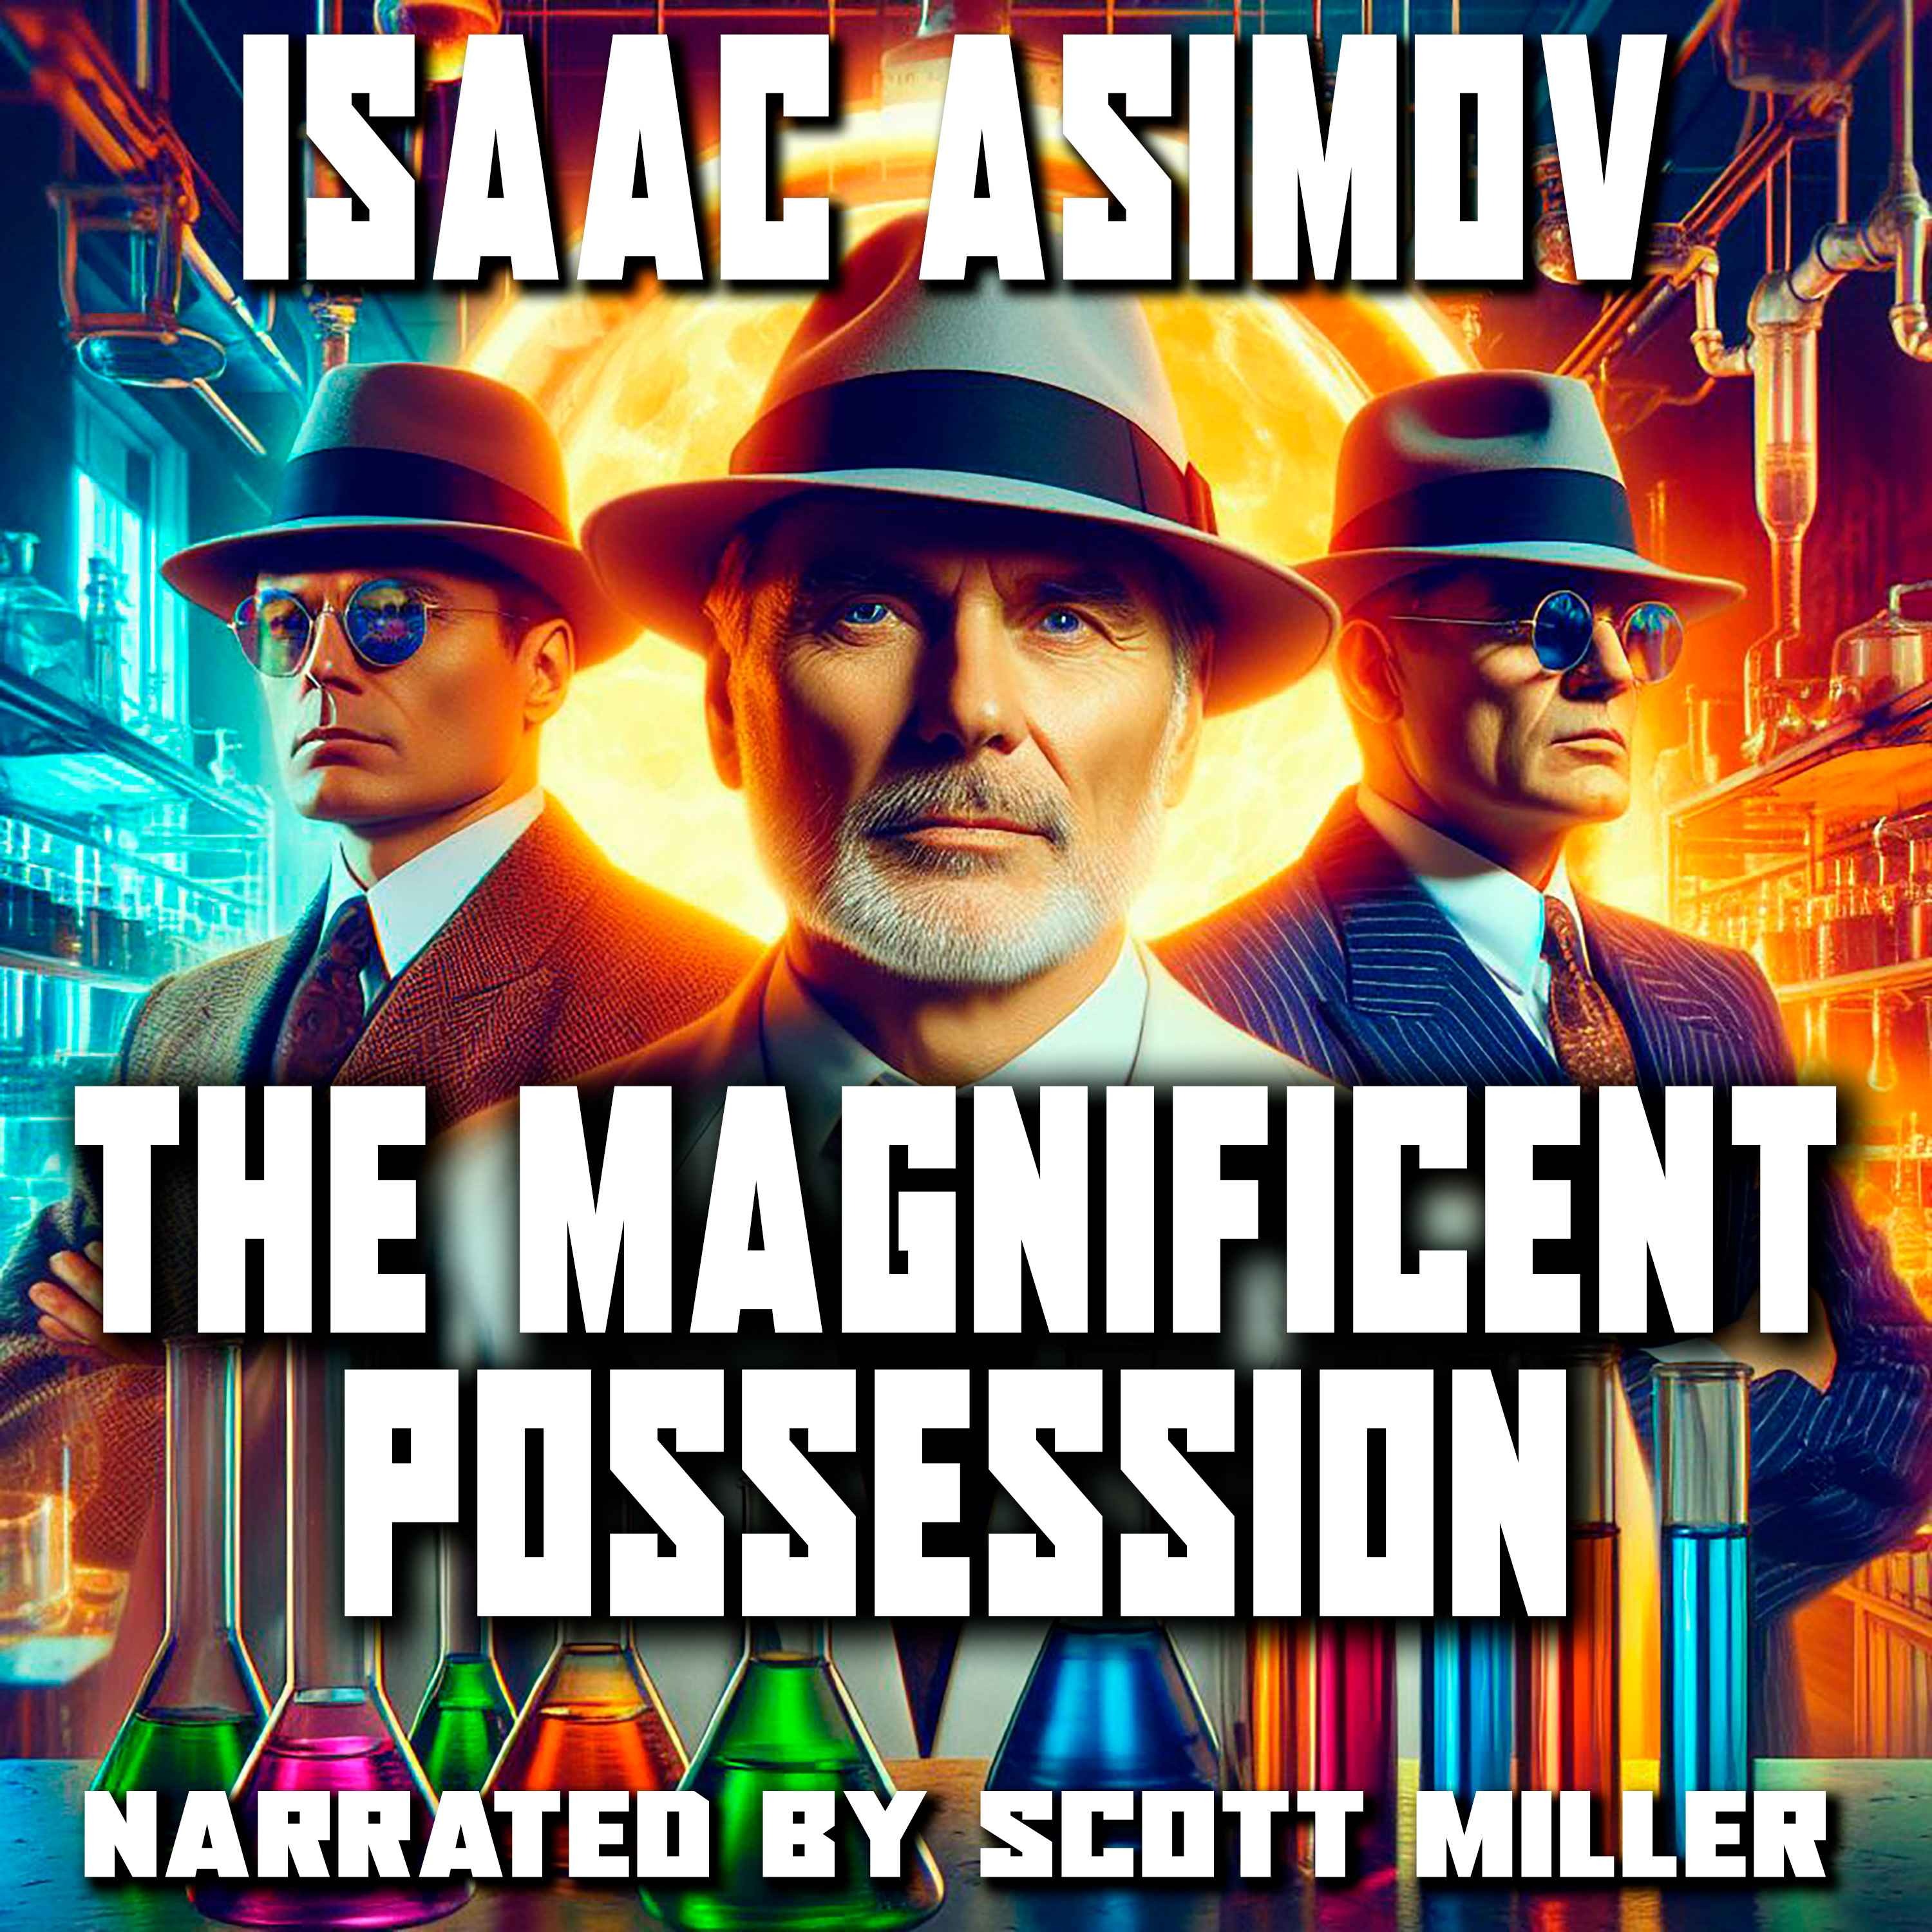 The Magnificent Possession by Isaac Asimov - Early Isaac Asimov Stories